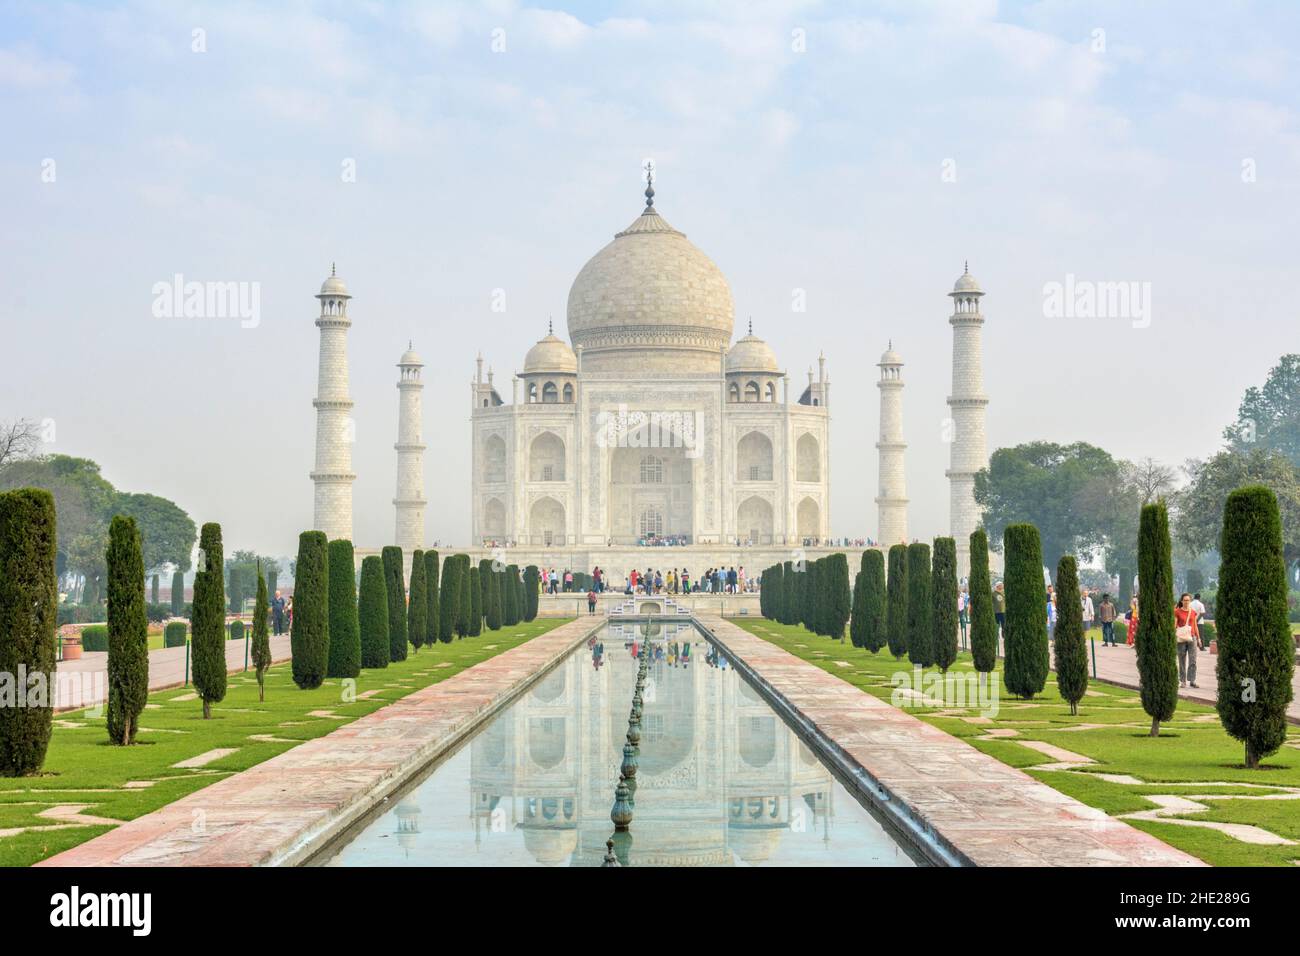 Early morning view of the Taj Mahal reflected in the reflecting pool, Agra, Uttar Pradesh, India, South Asia Stock Photo